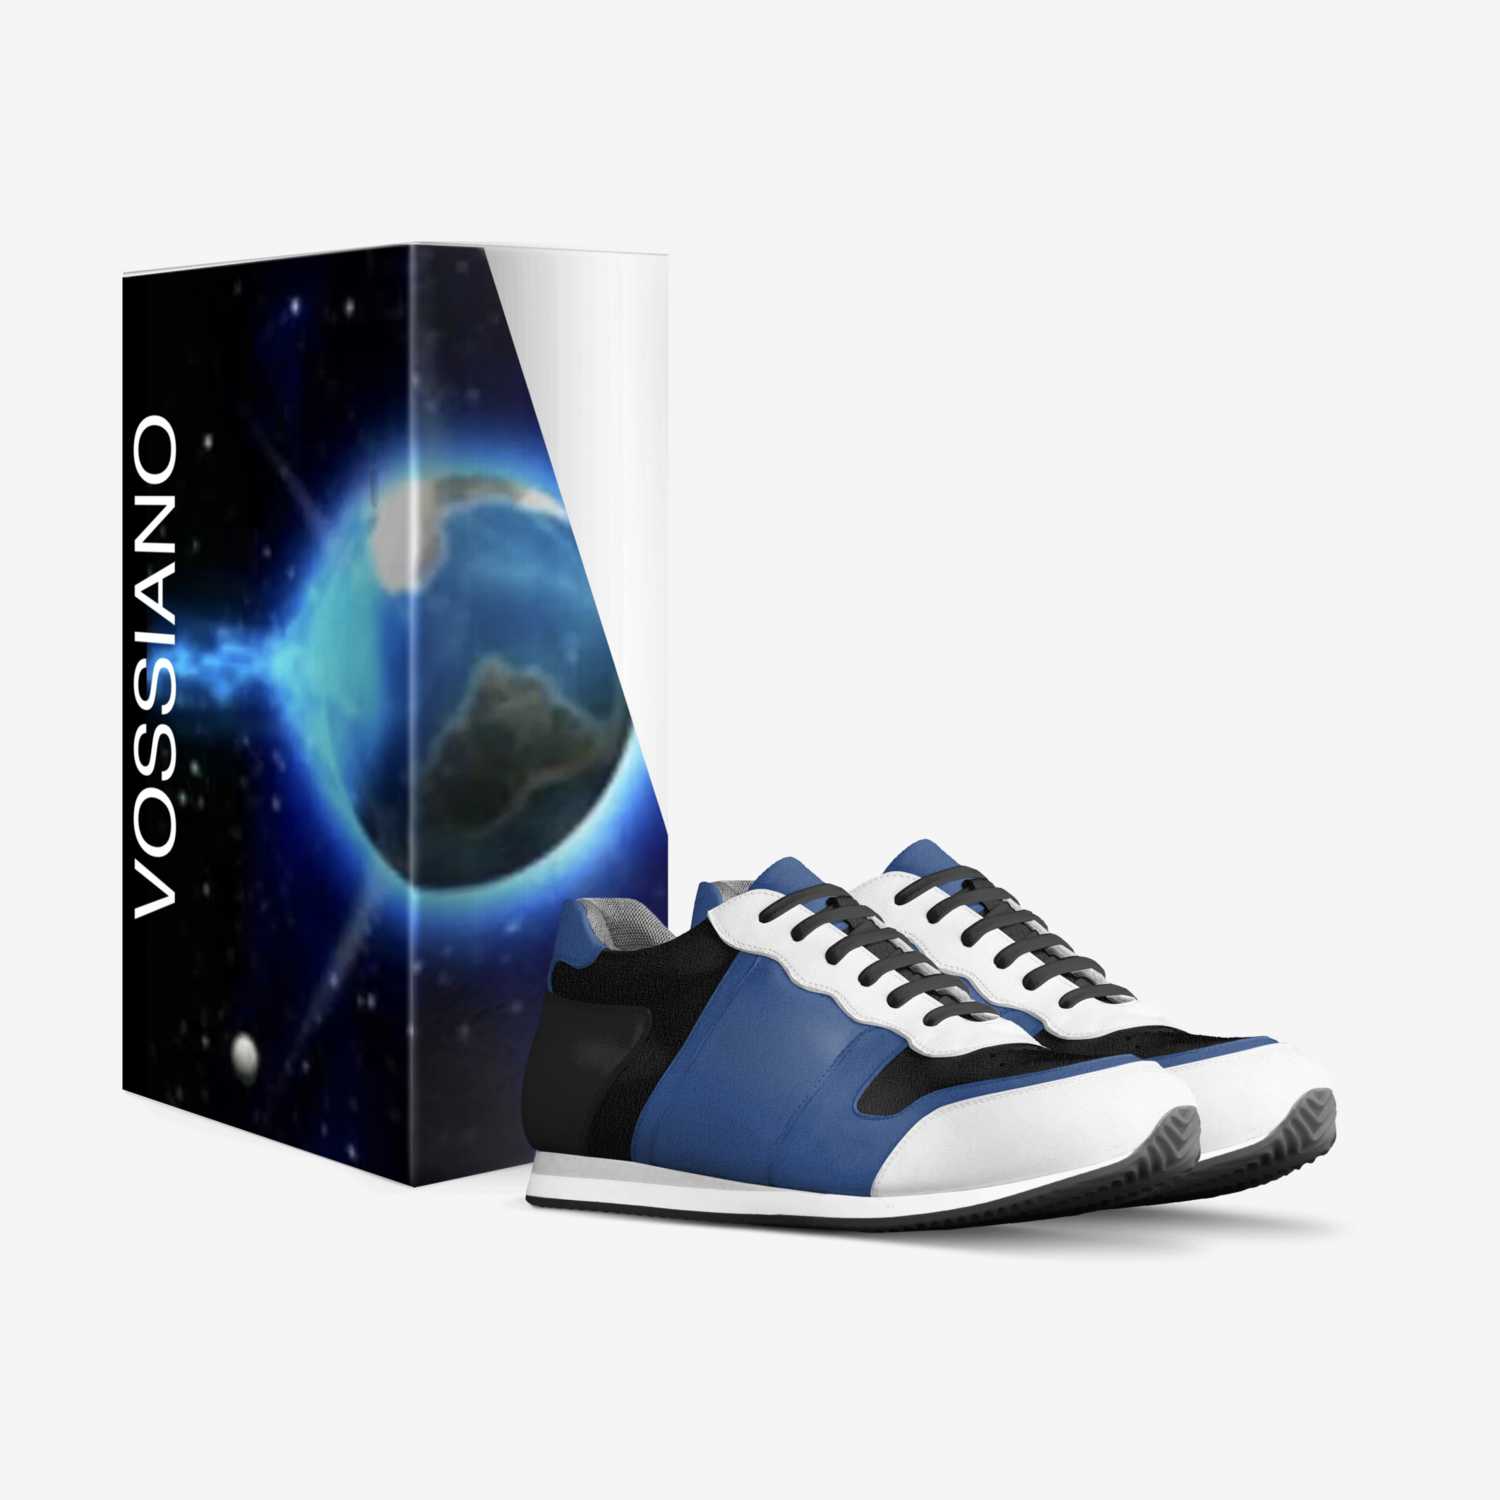 Vossiano custom made in Italy shoes by Voris S Johnson | Box view